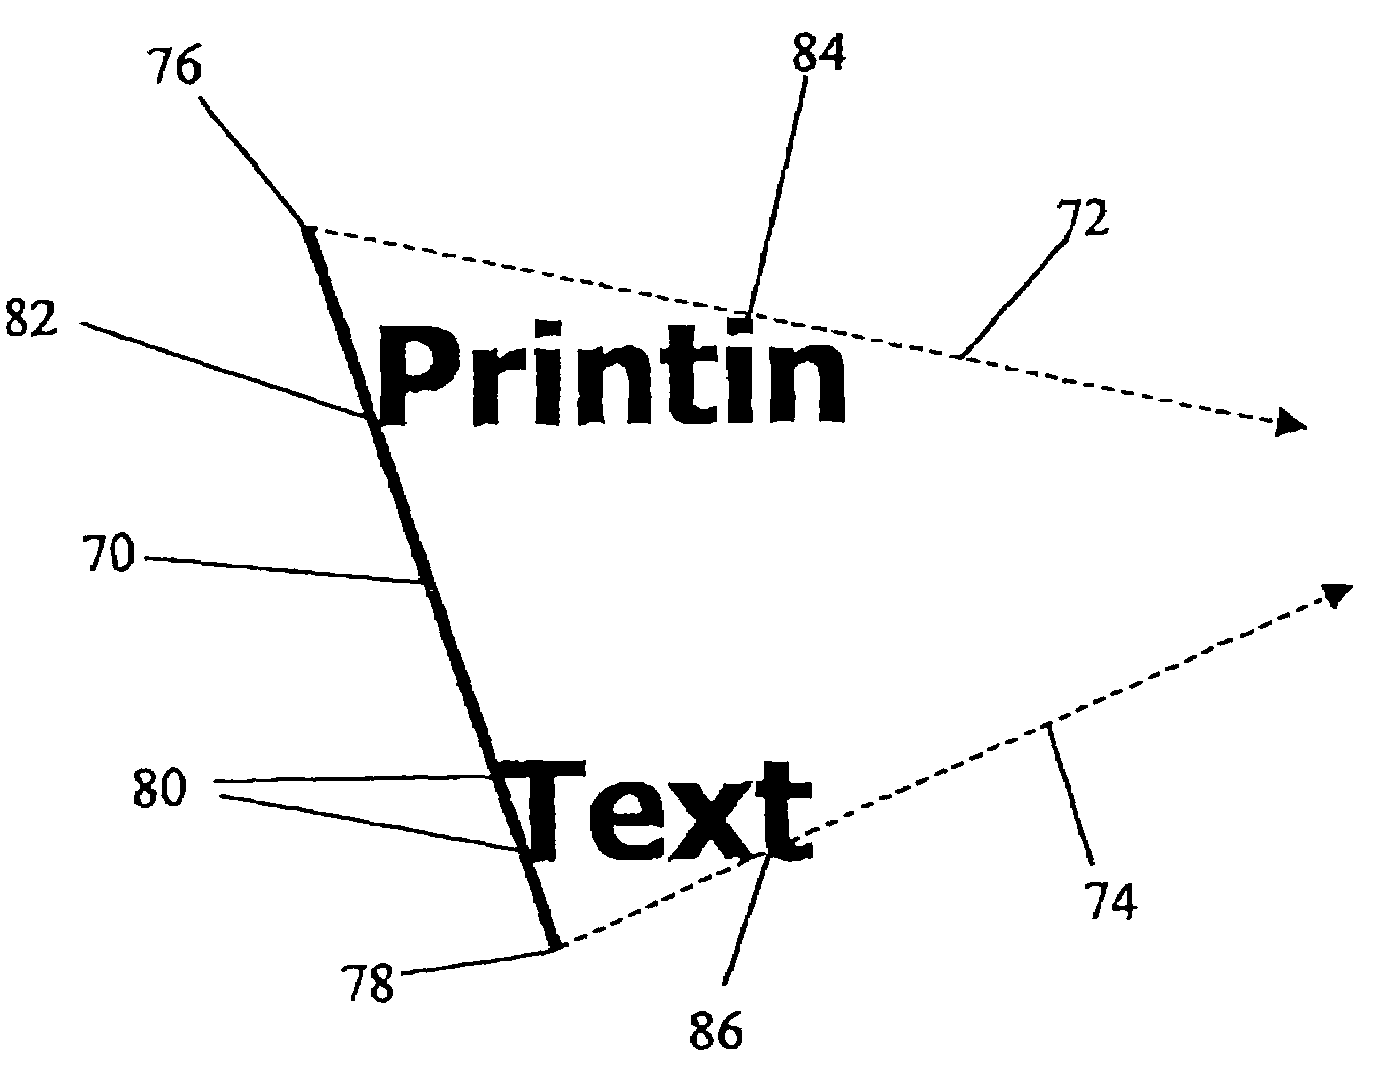 Hand held printing of text and images for preventing skew and cutting of printed images